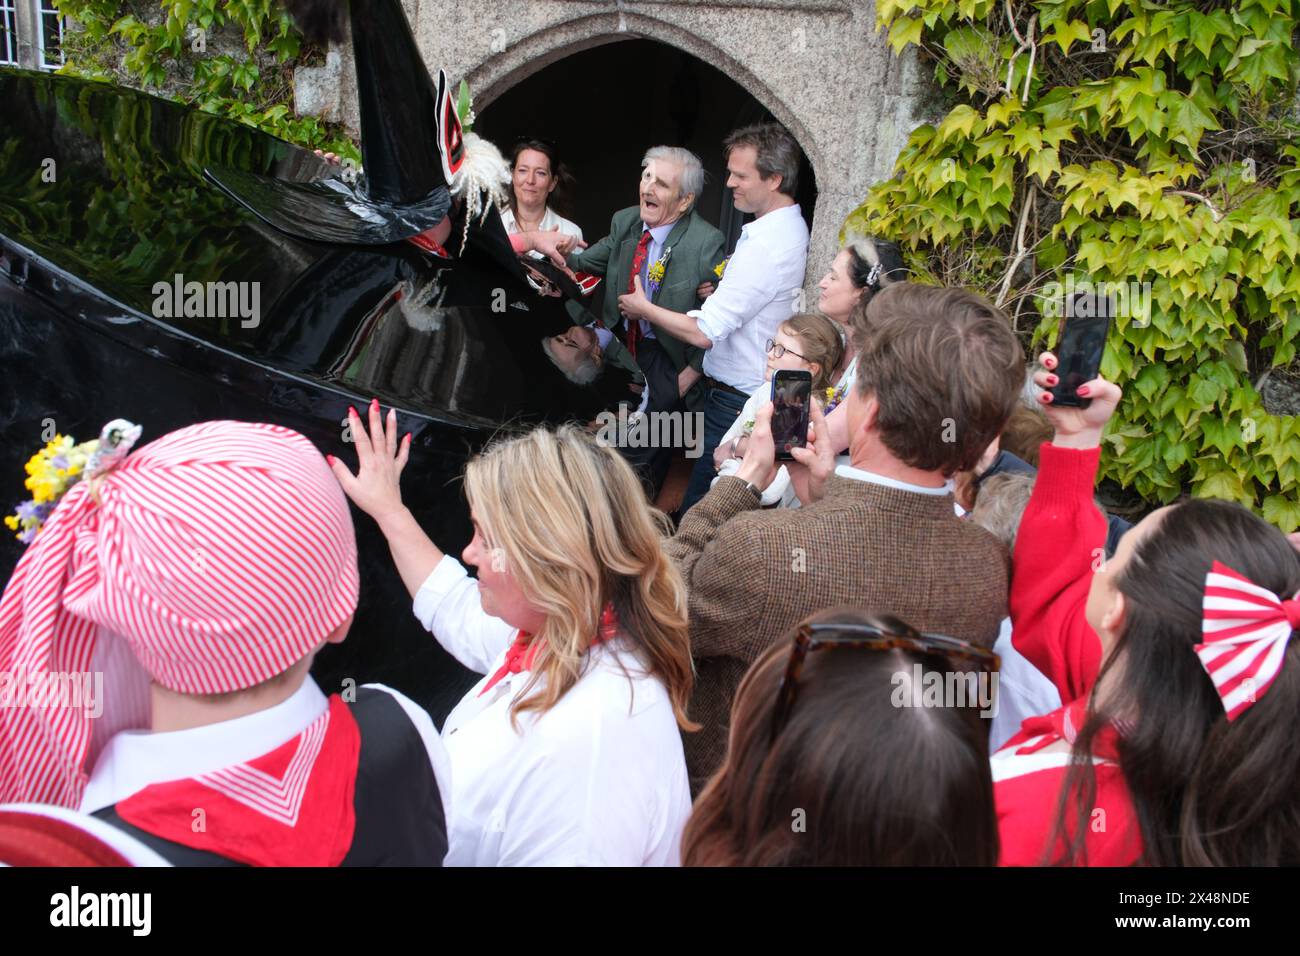 Padstow, Cornwall, UK. 1st May 2024. May Day celebrations. The Obby Oss makes it way through Padstow on Mayday upto Prideaux place in Padstow to meet the 'squire' - Peter Prideaux Brune.. Credit Simon Maycock / Alamy Live News. Stock Photo